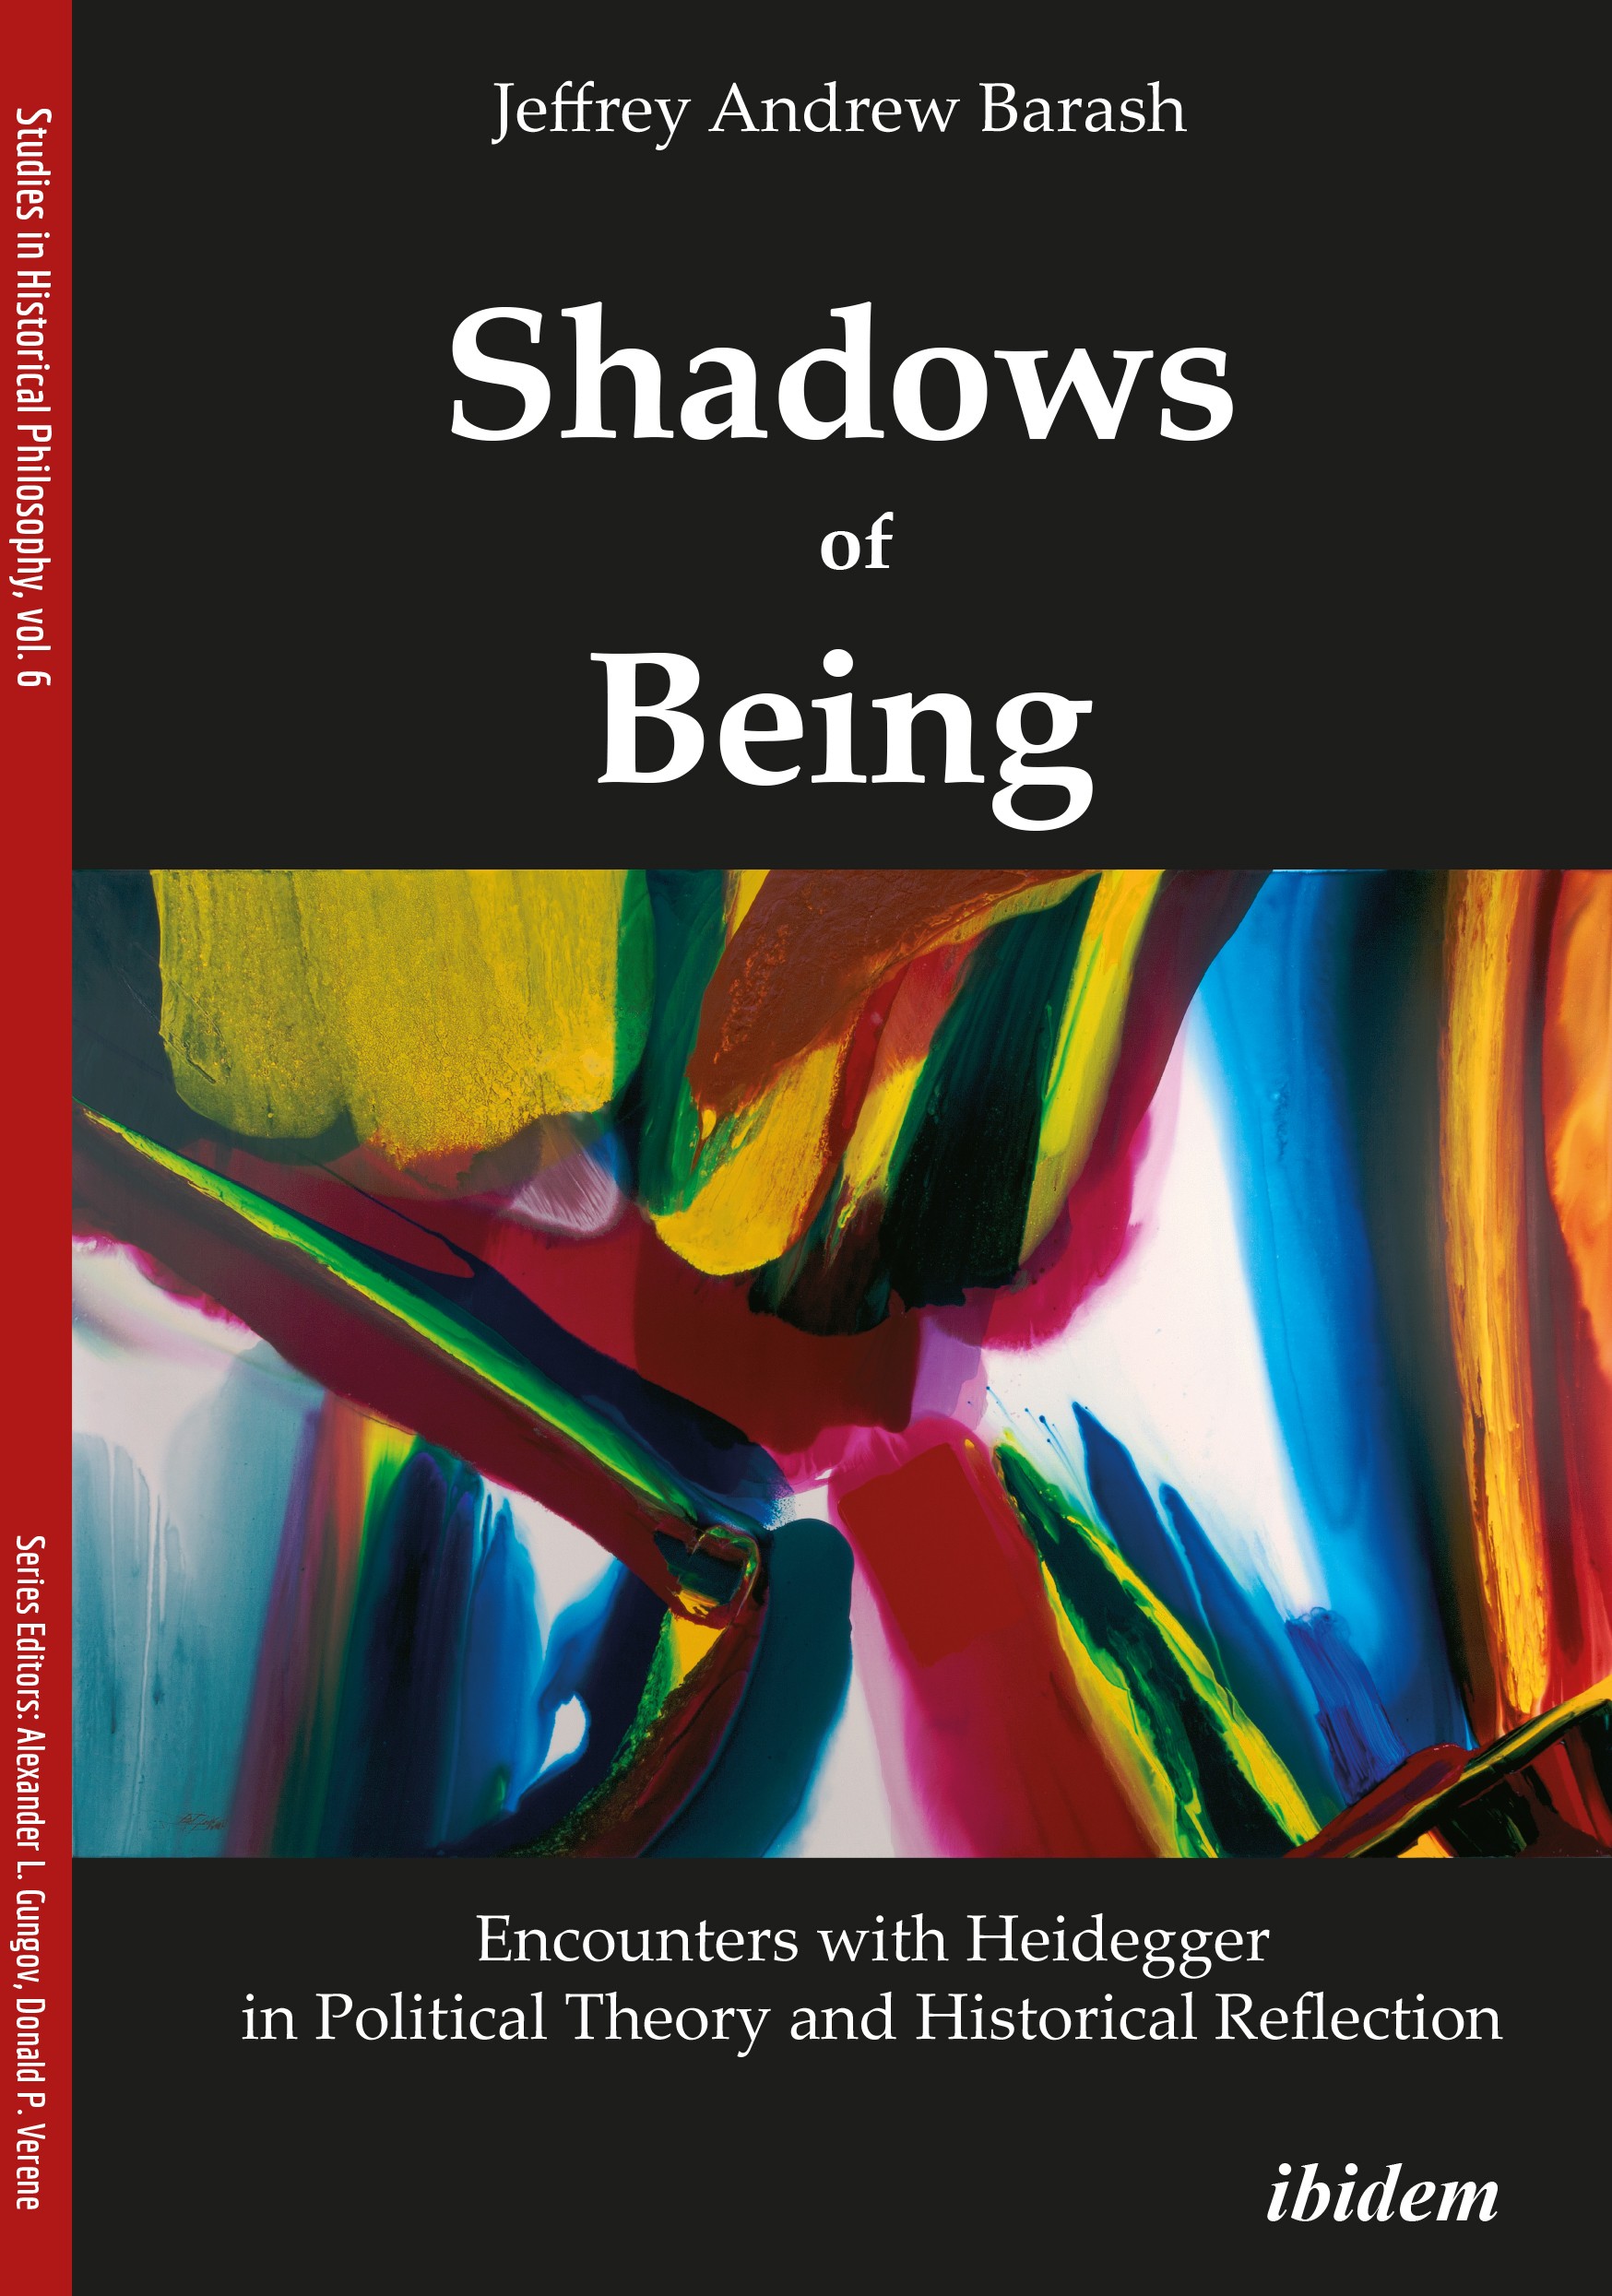 Shadows of Being: Encounters with Heidegger in Political Theory and Historical Reflection